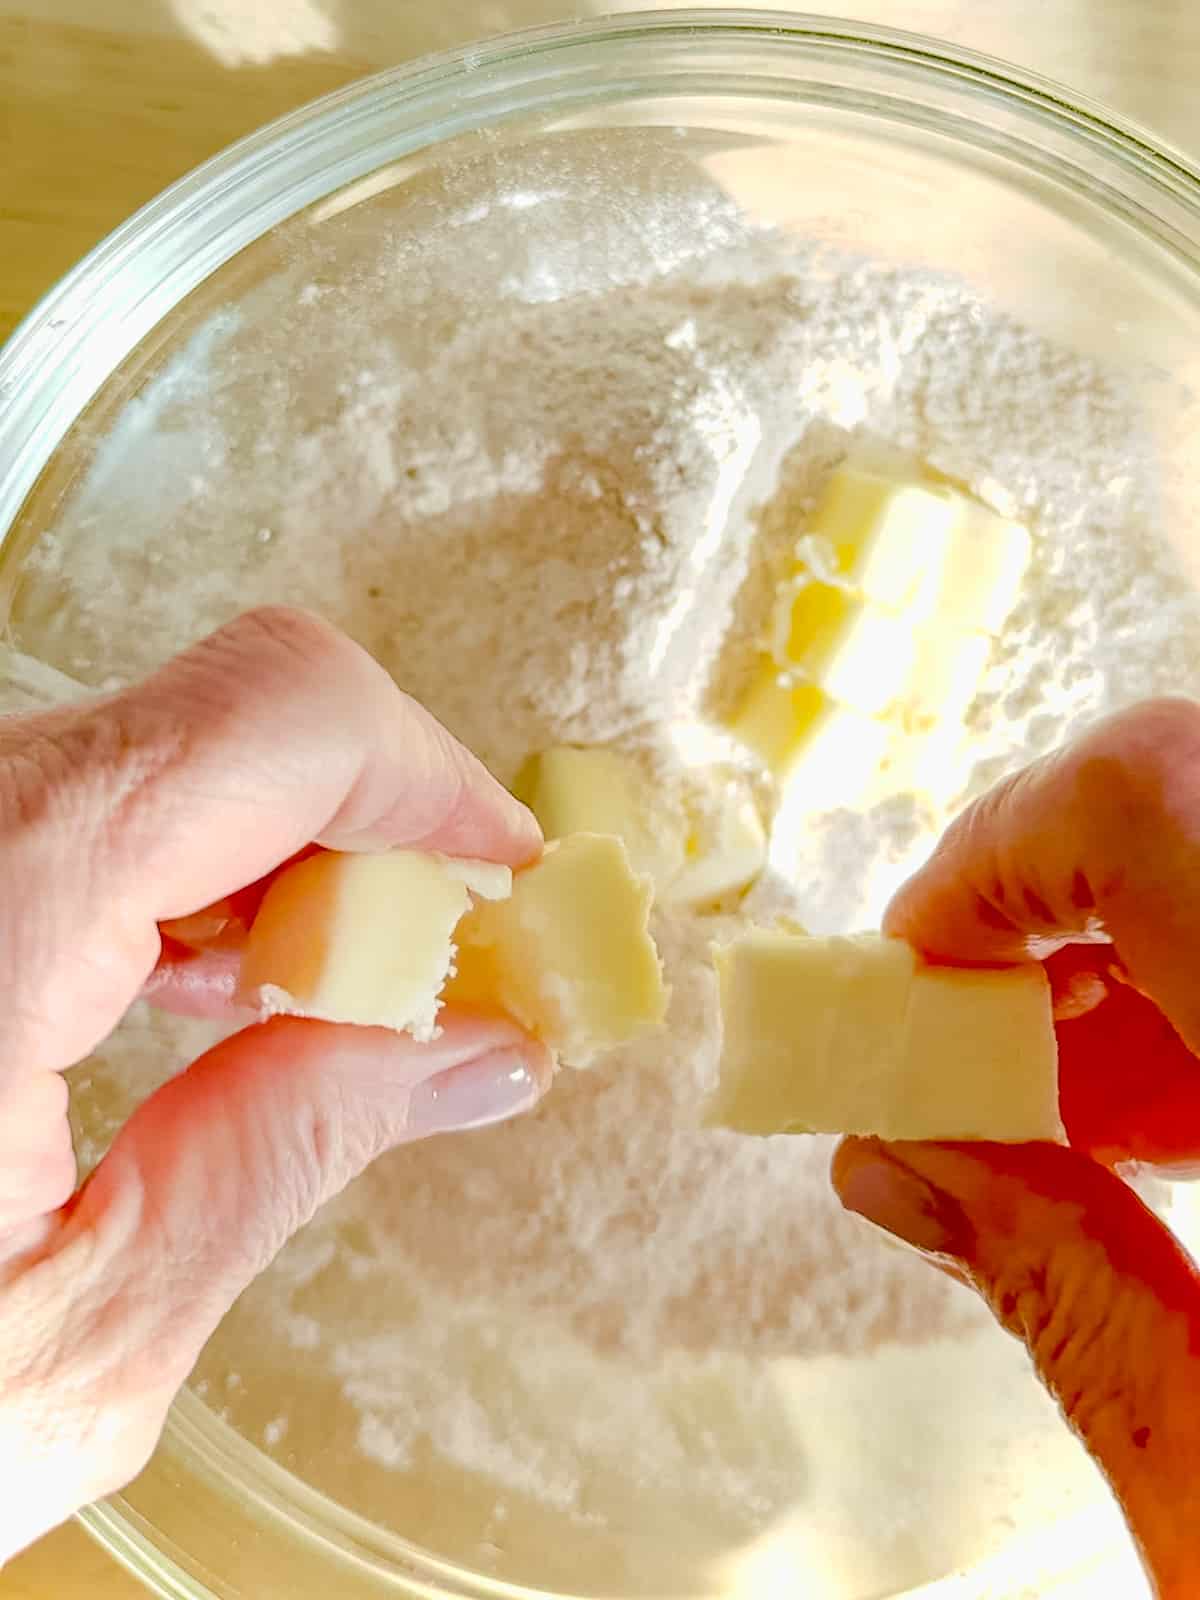 Breaking up butter cubes into flour and brown sugar in a bowl.